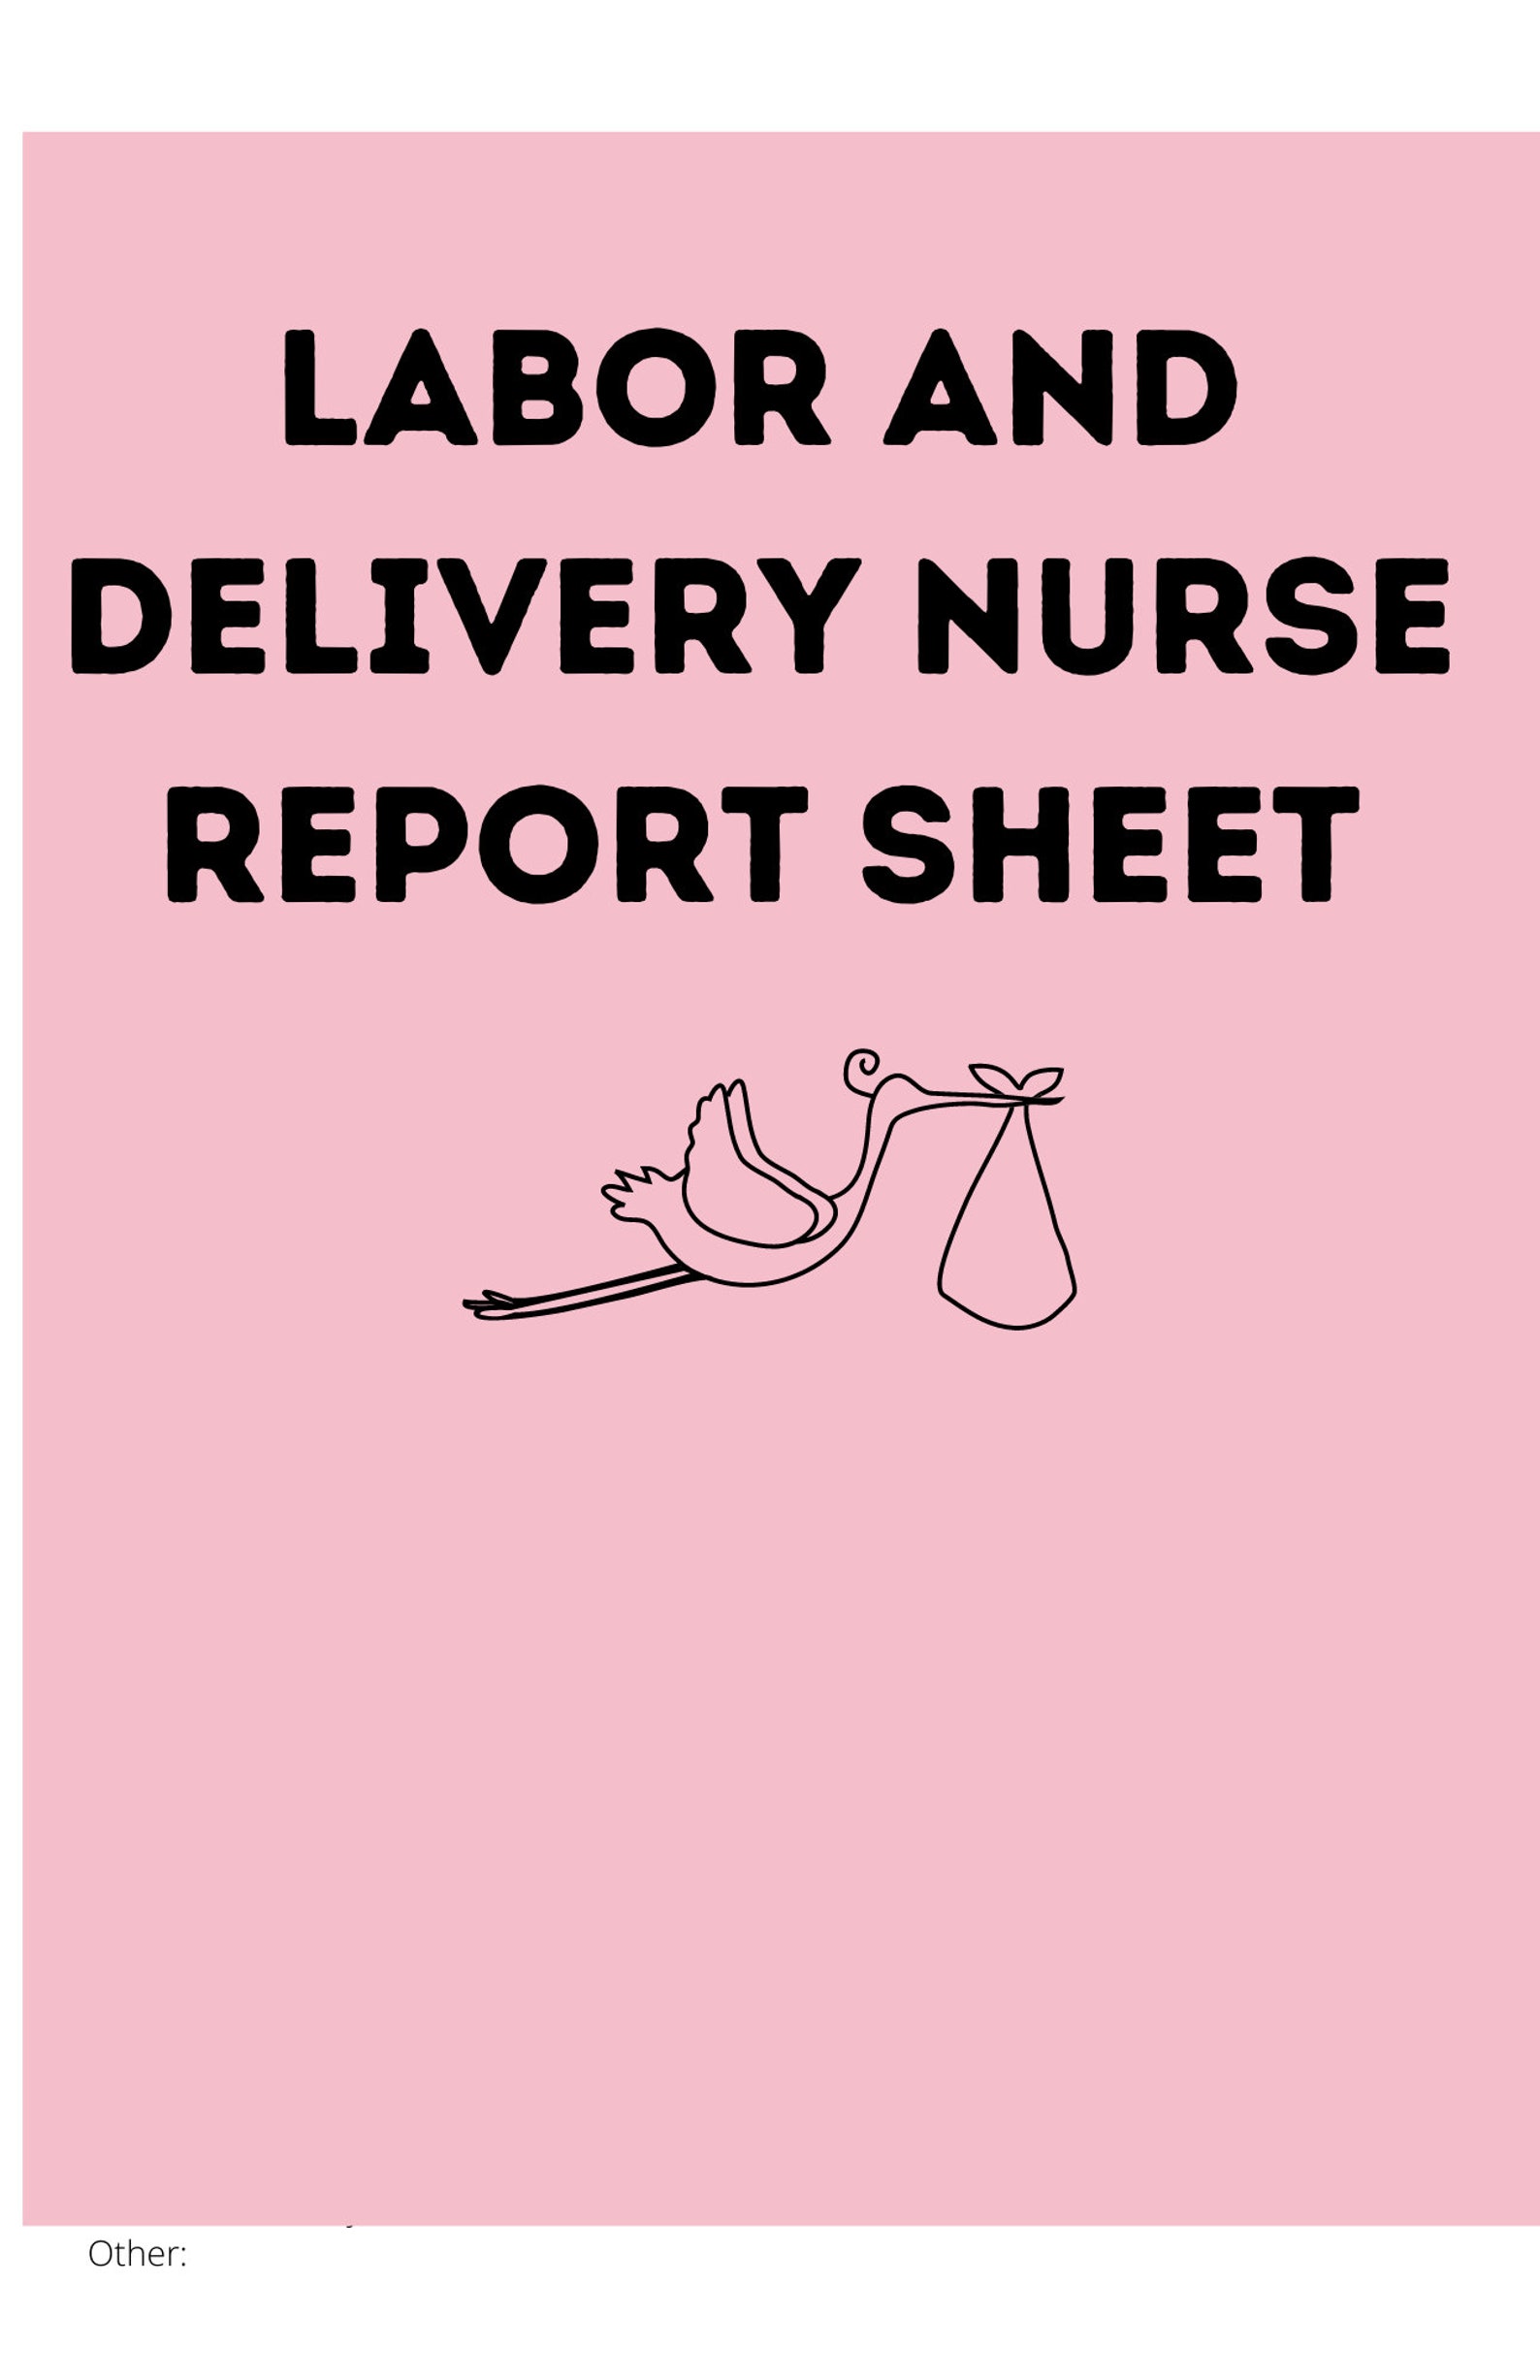 Labor and Delivery Nurse Report Sheet DIGITAL DOWNLOAD | Etsy